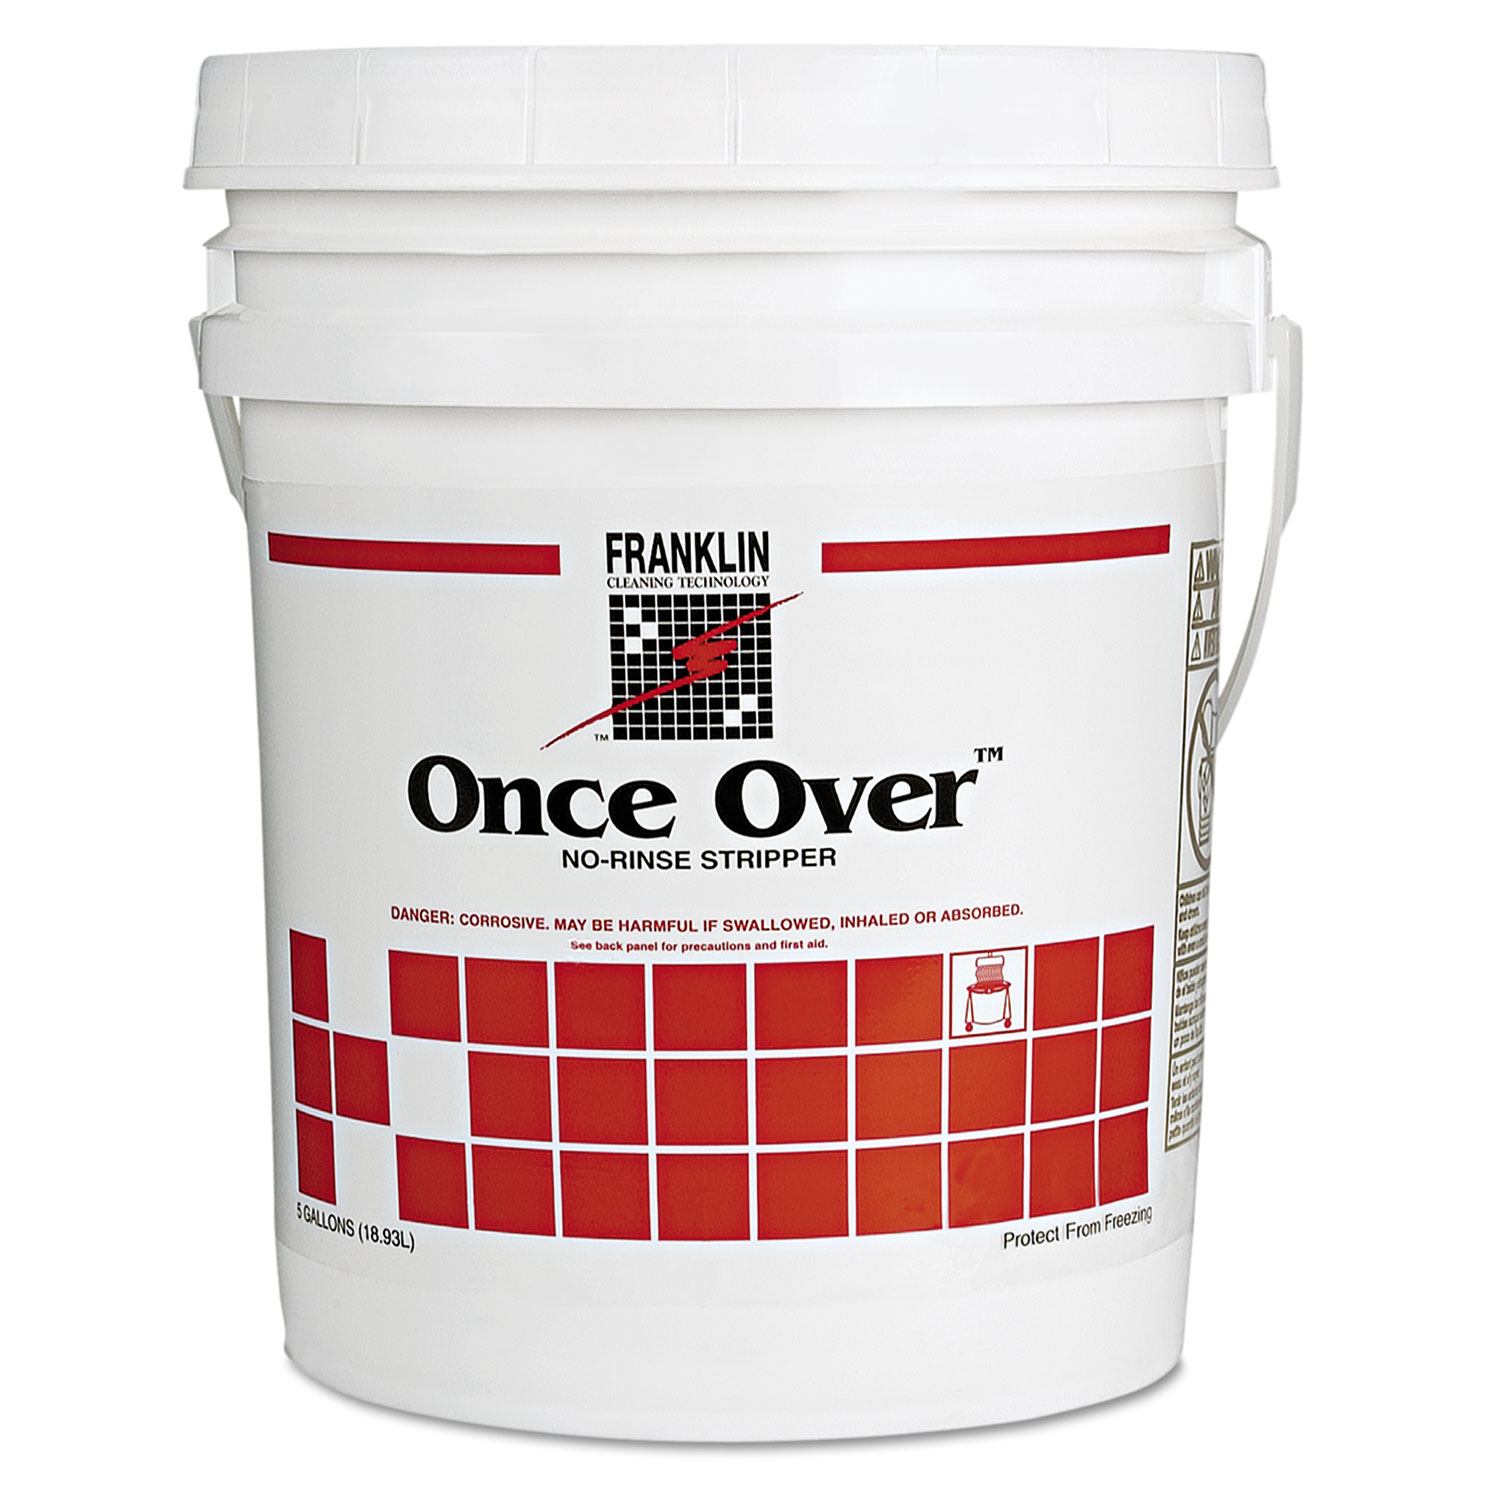  Franklin Cleaning Technology F200026 Once Over Floor Stripper, Liquid, 5 gal. Pail (FKLF200026) 